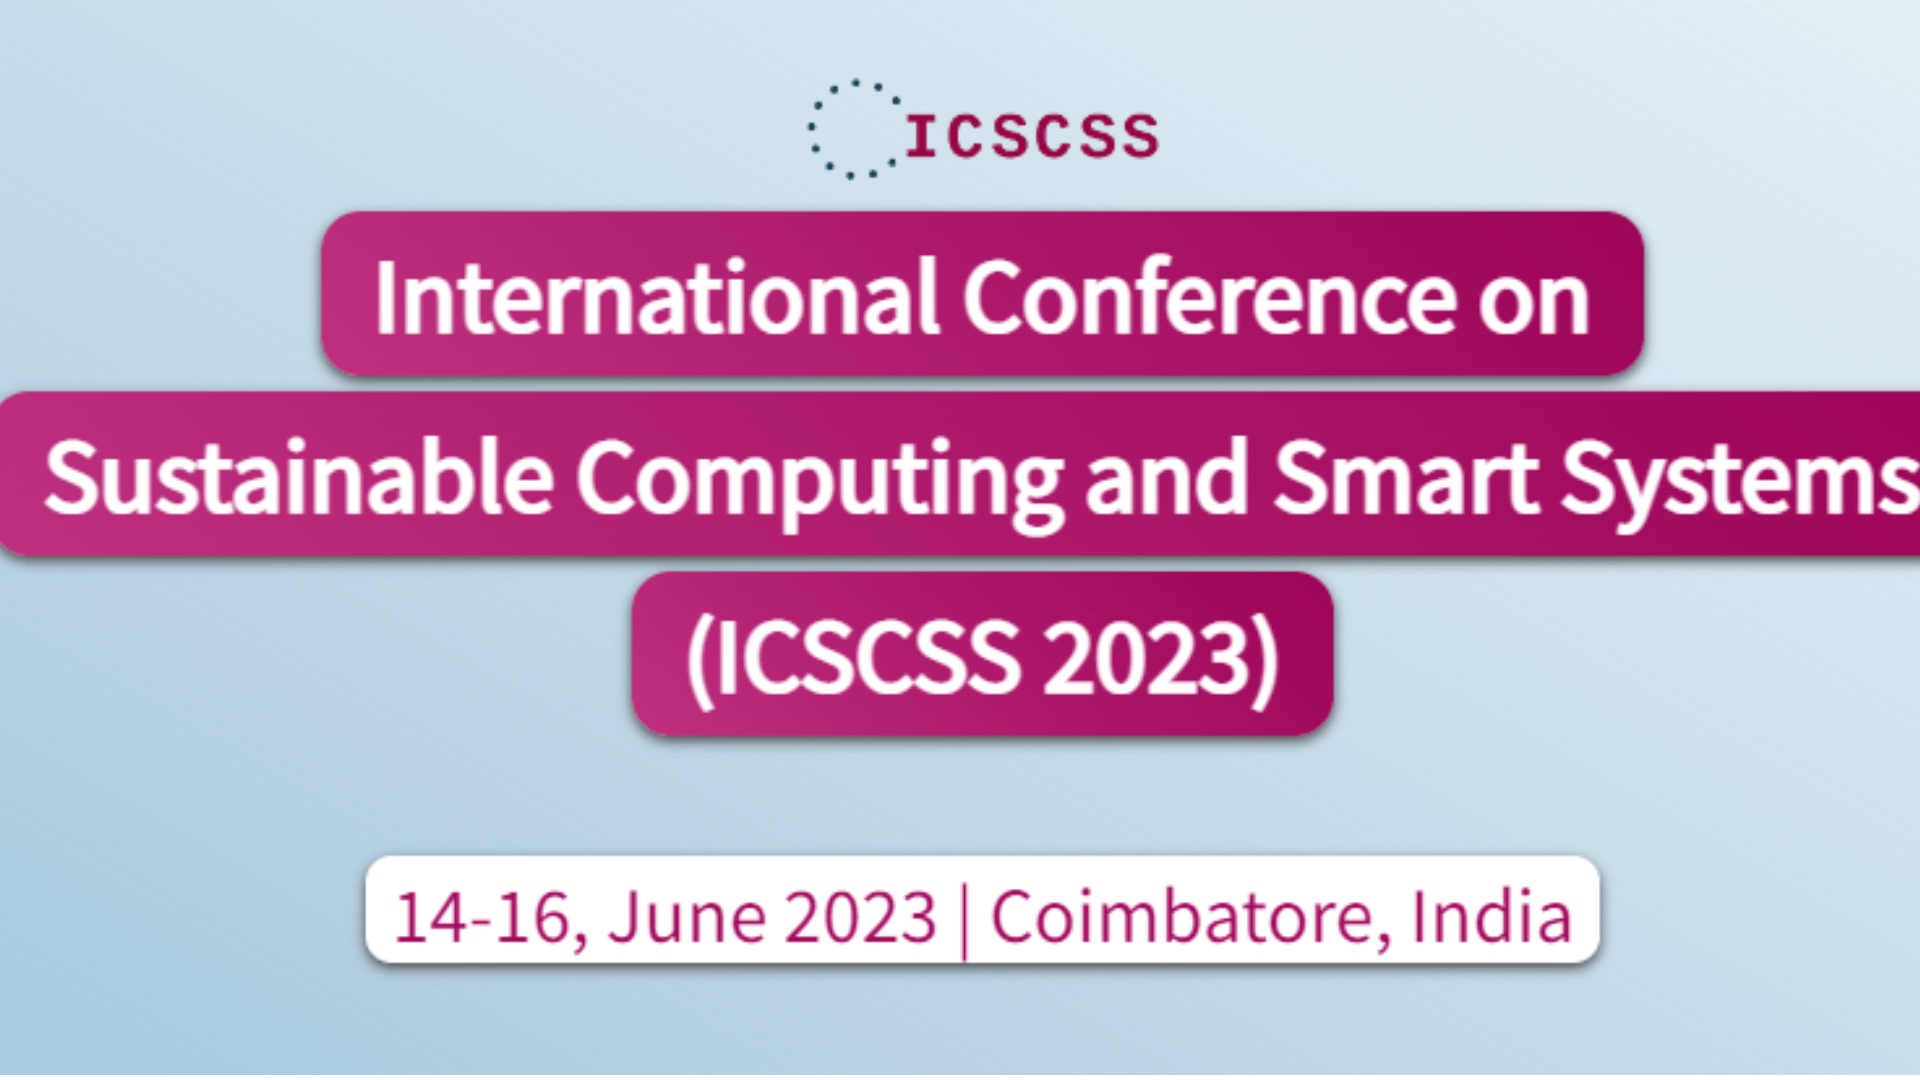 International Conference on Sustainable Computing and Smart Systems